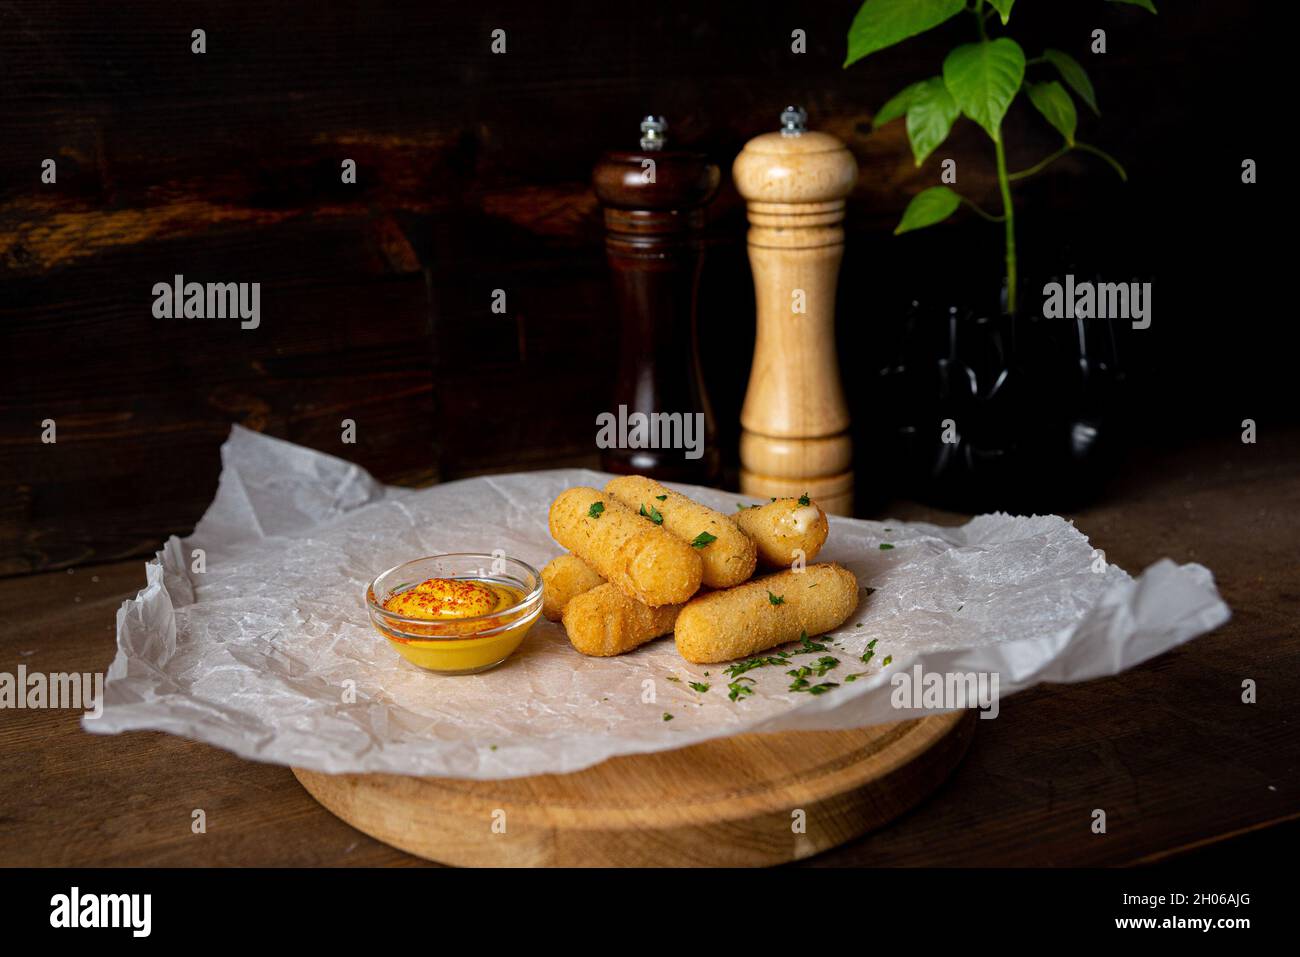 A portion of cheese sticks, served on a wooden board with mustard. Bar deep fried food. Shot in the interior of a bar against a dark wooden background Stock Photo